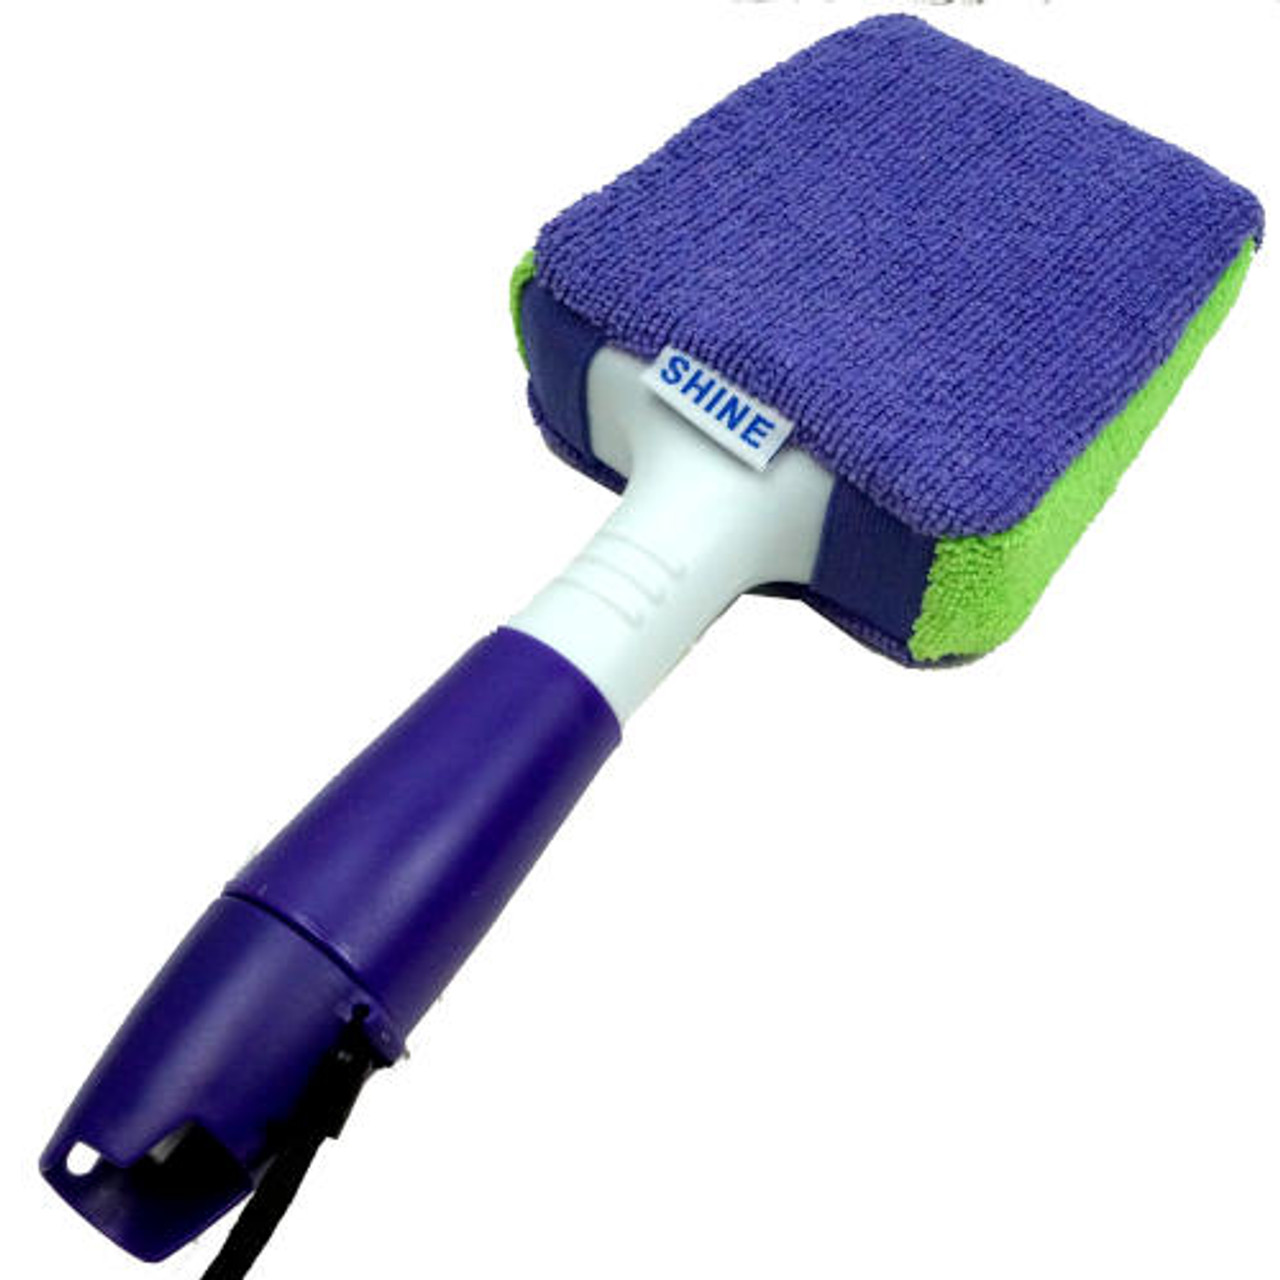 Clothes & Fabric Brush w. Handle